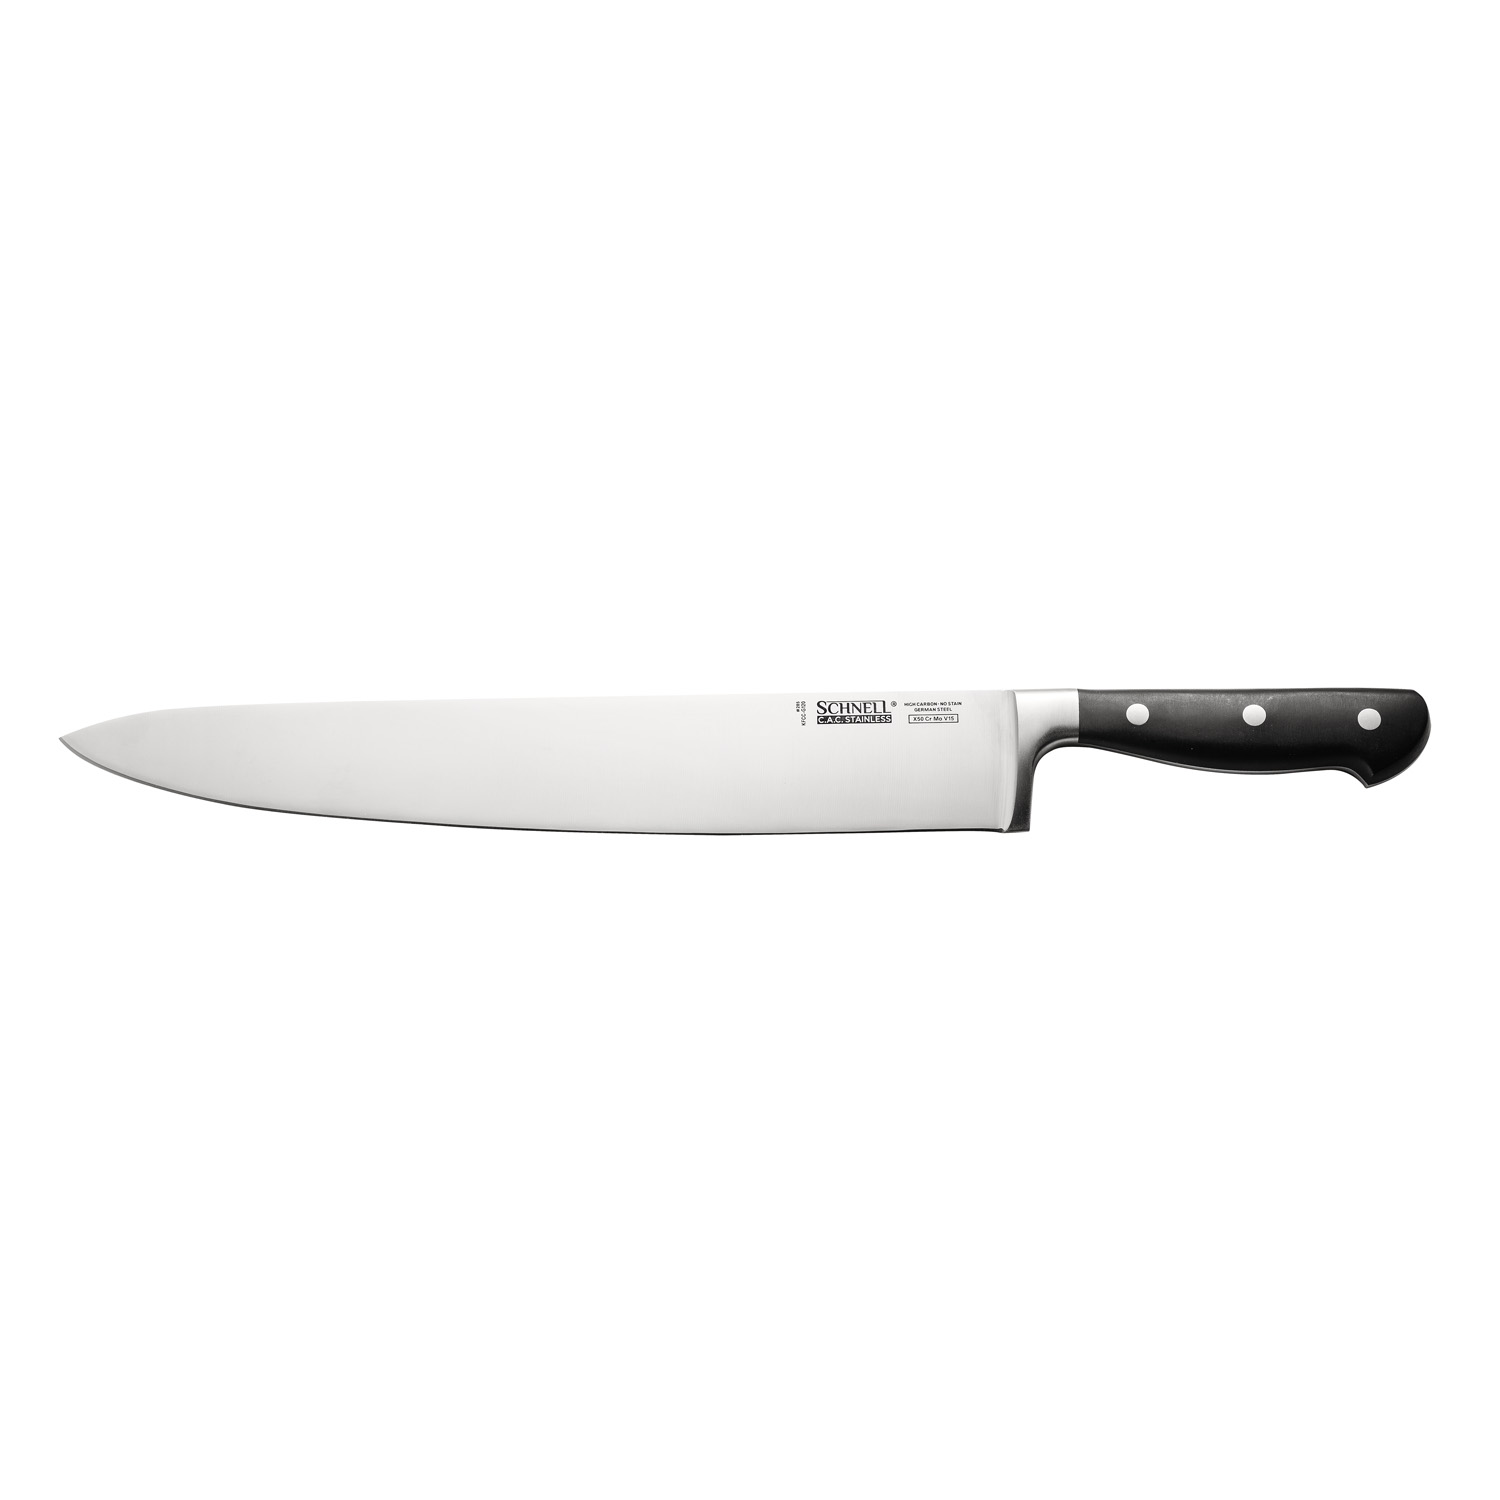 CAC China KFCC-G120 Schnell Forged Chef Knife 12" with Black Handle